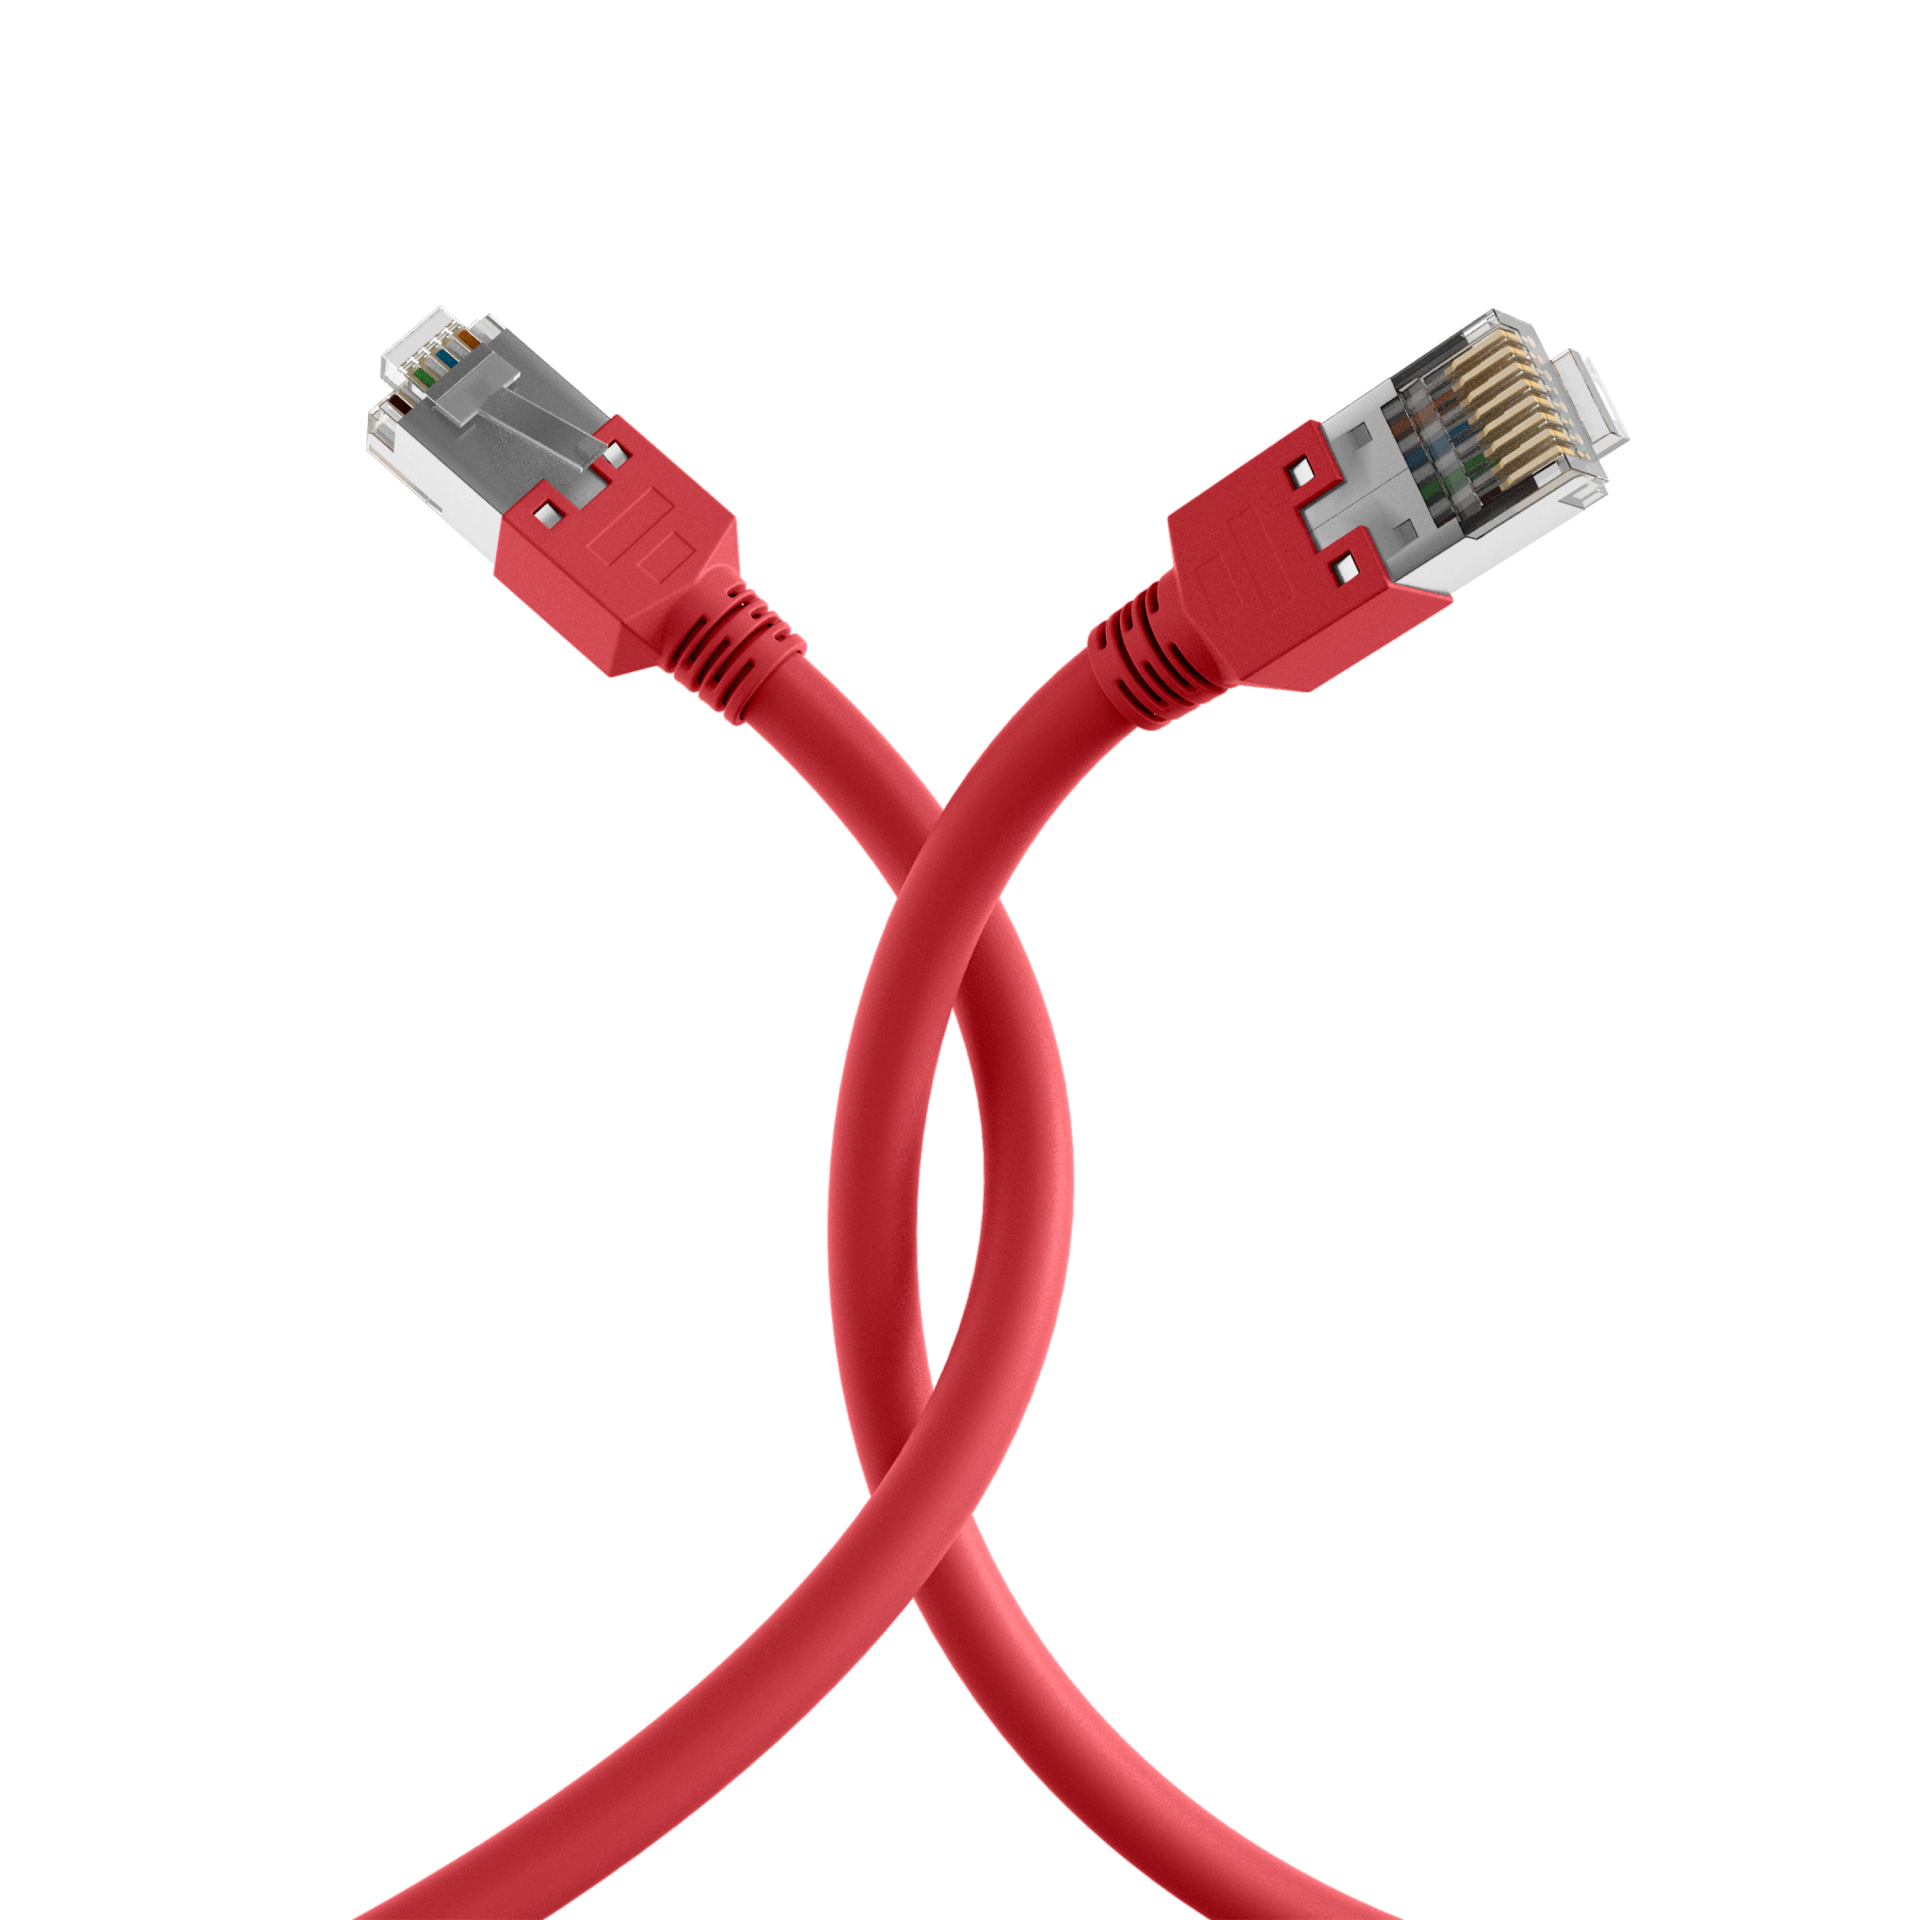 RJ45 Patch Cord Cat.5e S/UTP PVCDätwyler 5502 TM11 red 3m